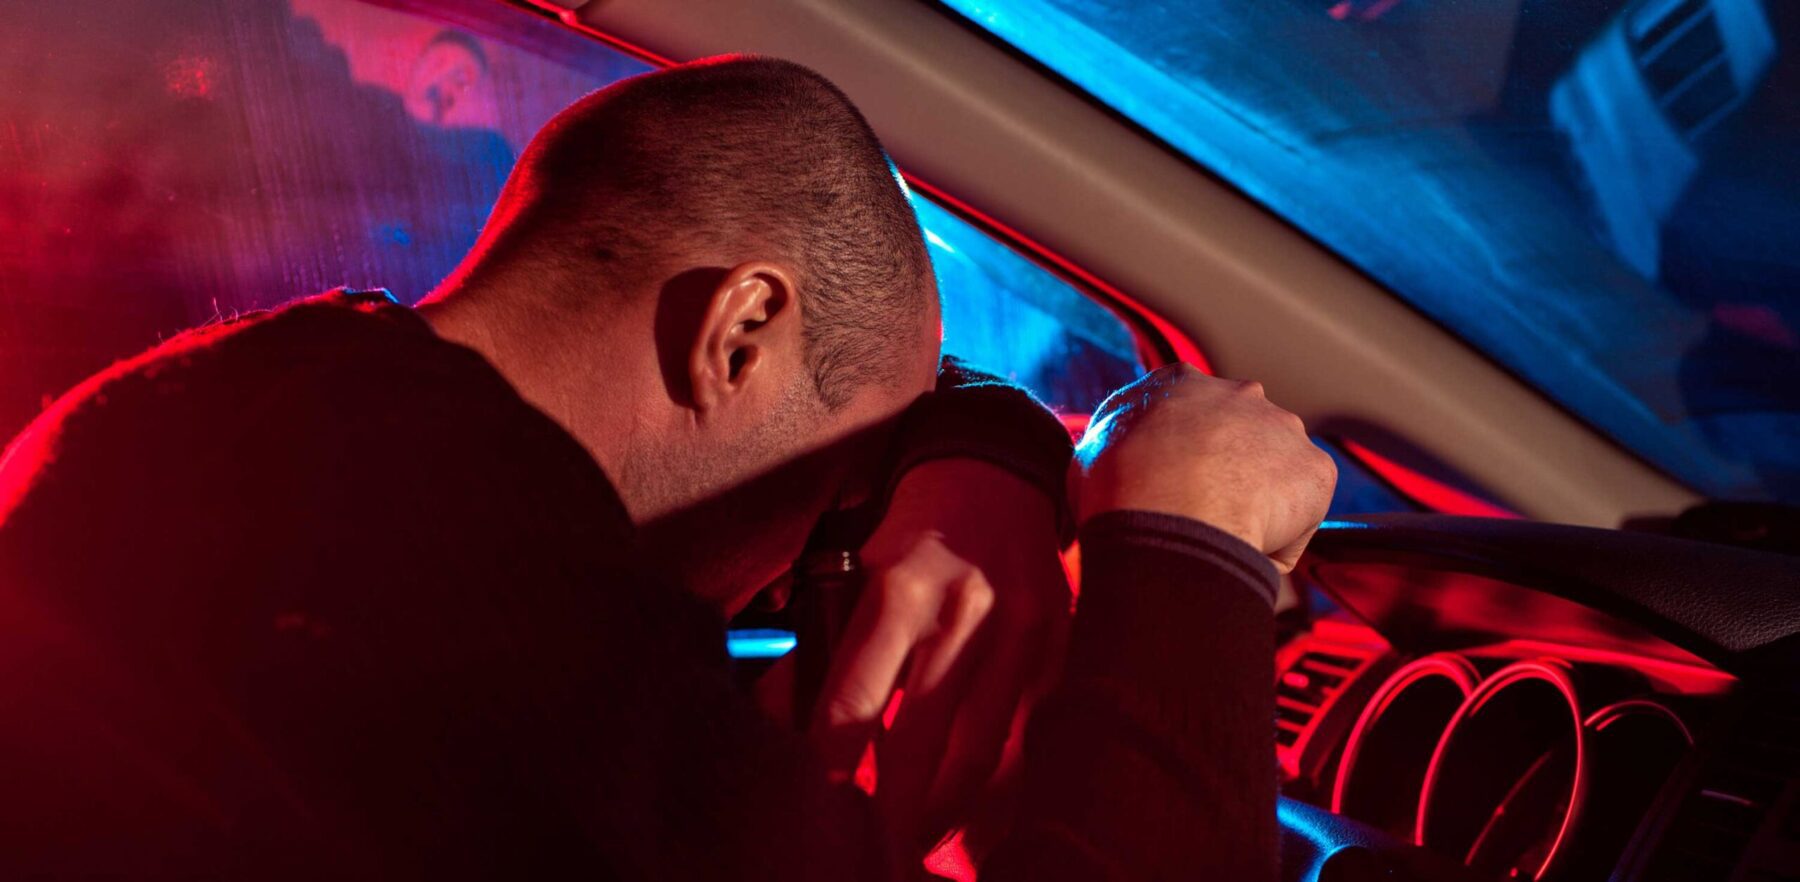 Man pulled over for driving under the influence with police flashers in his window